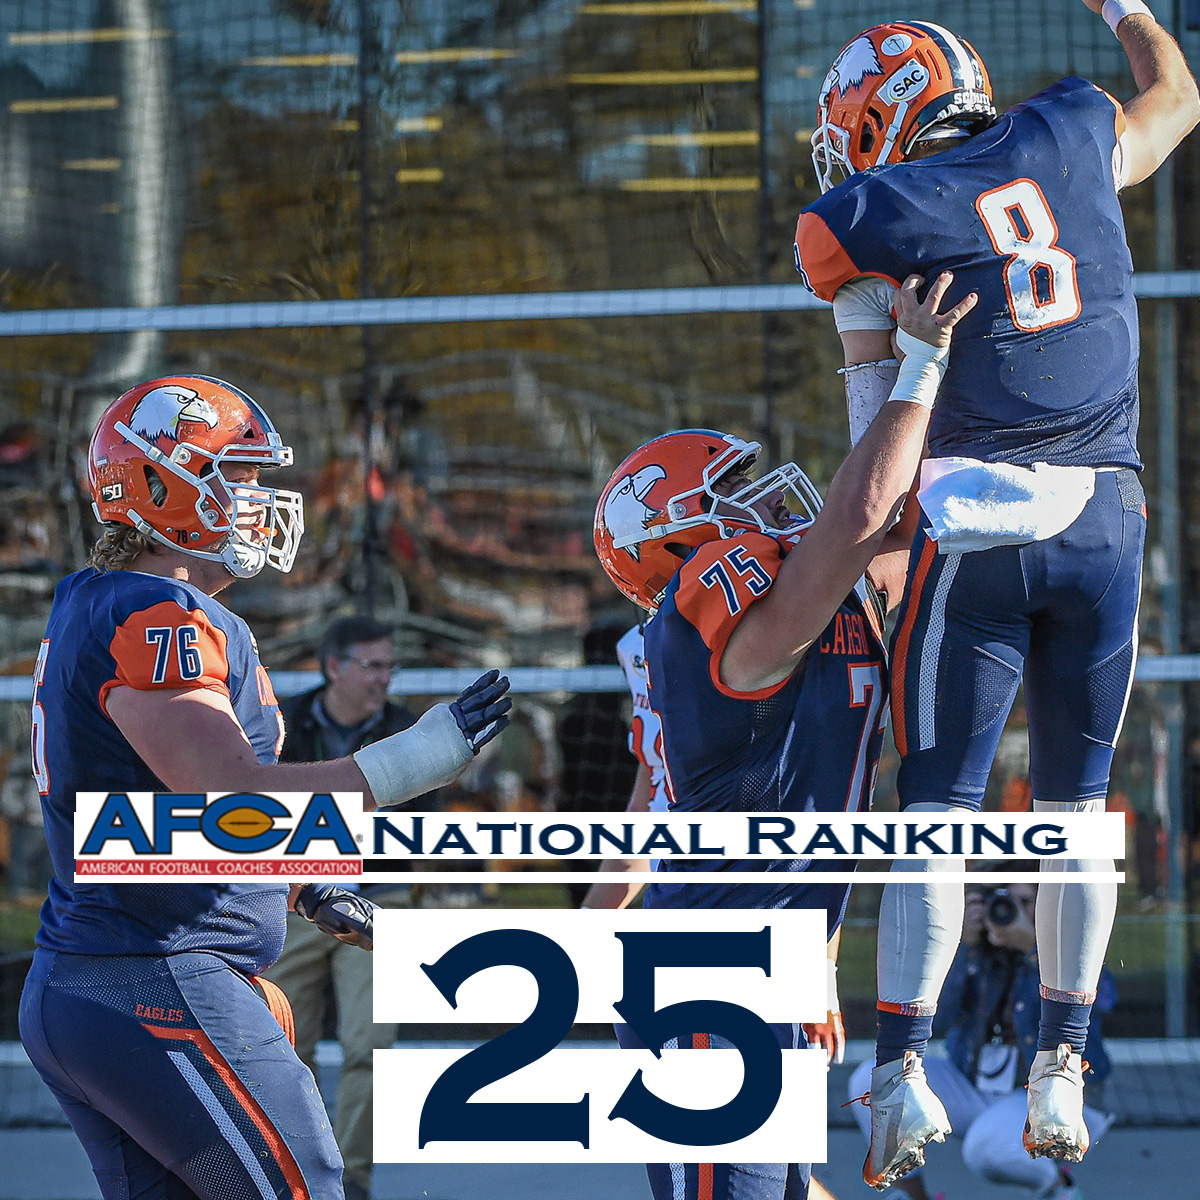 C-N Football makes appearance in AFCA Top 25